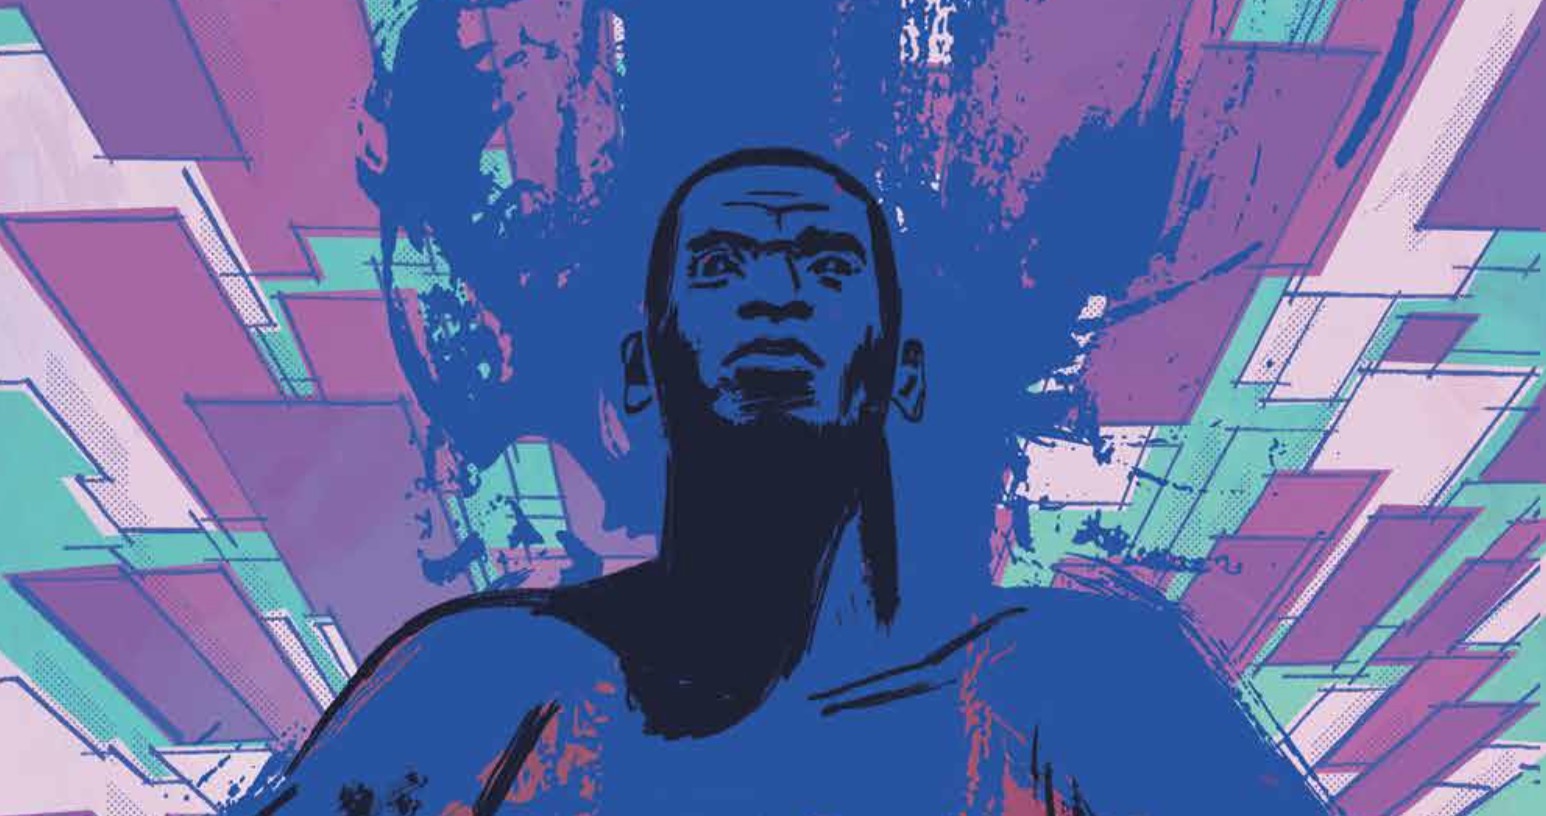 'Indigo Children' #2 features a superhero with clever powers